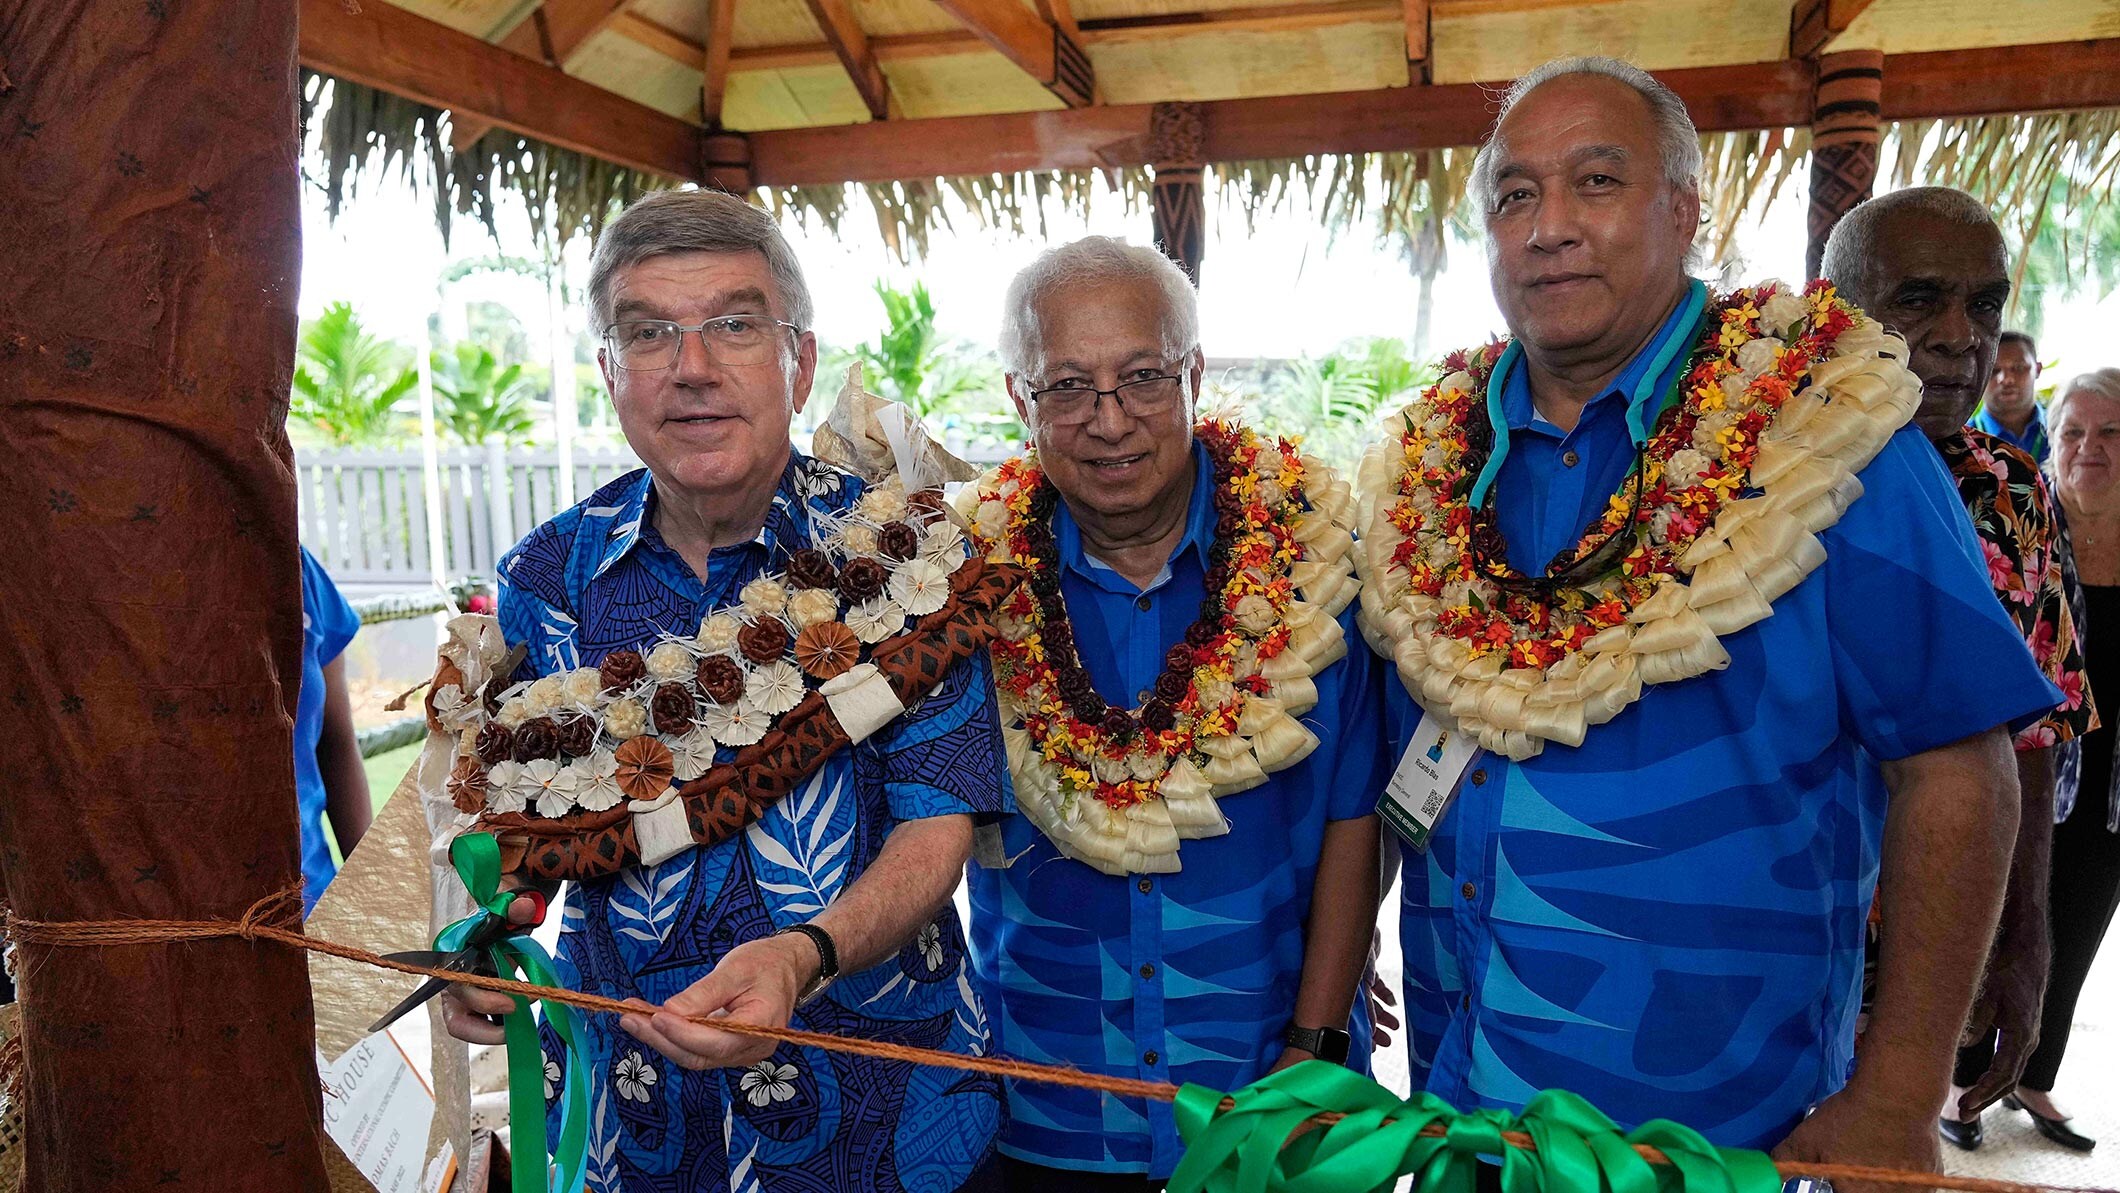 IOC President Thomas Bach attends the opening of ONOC Head Quarters in Fiji